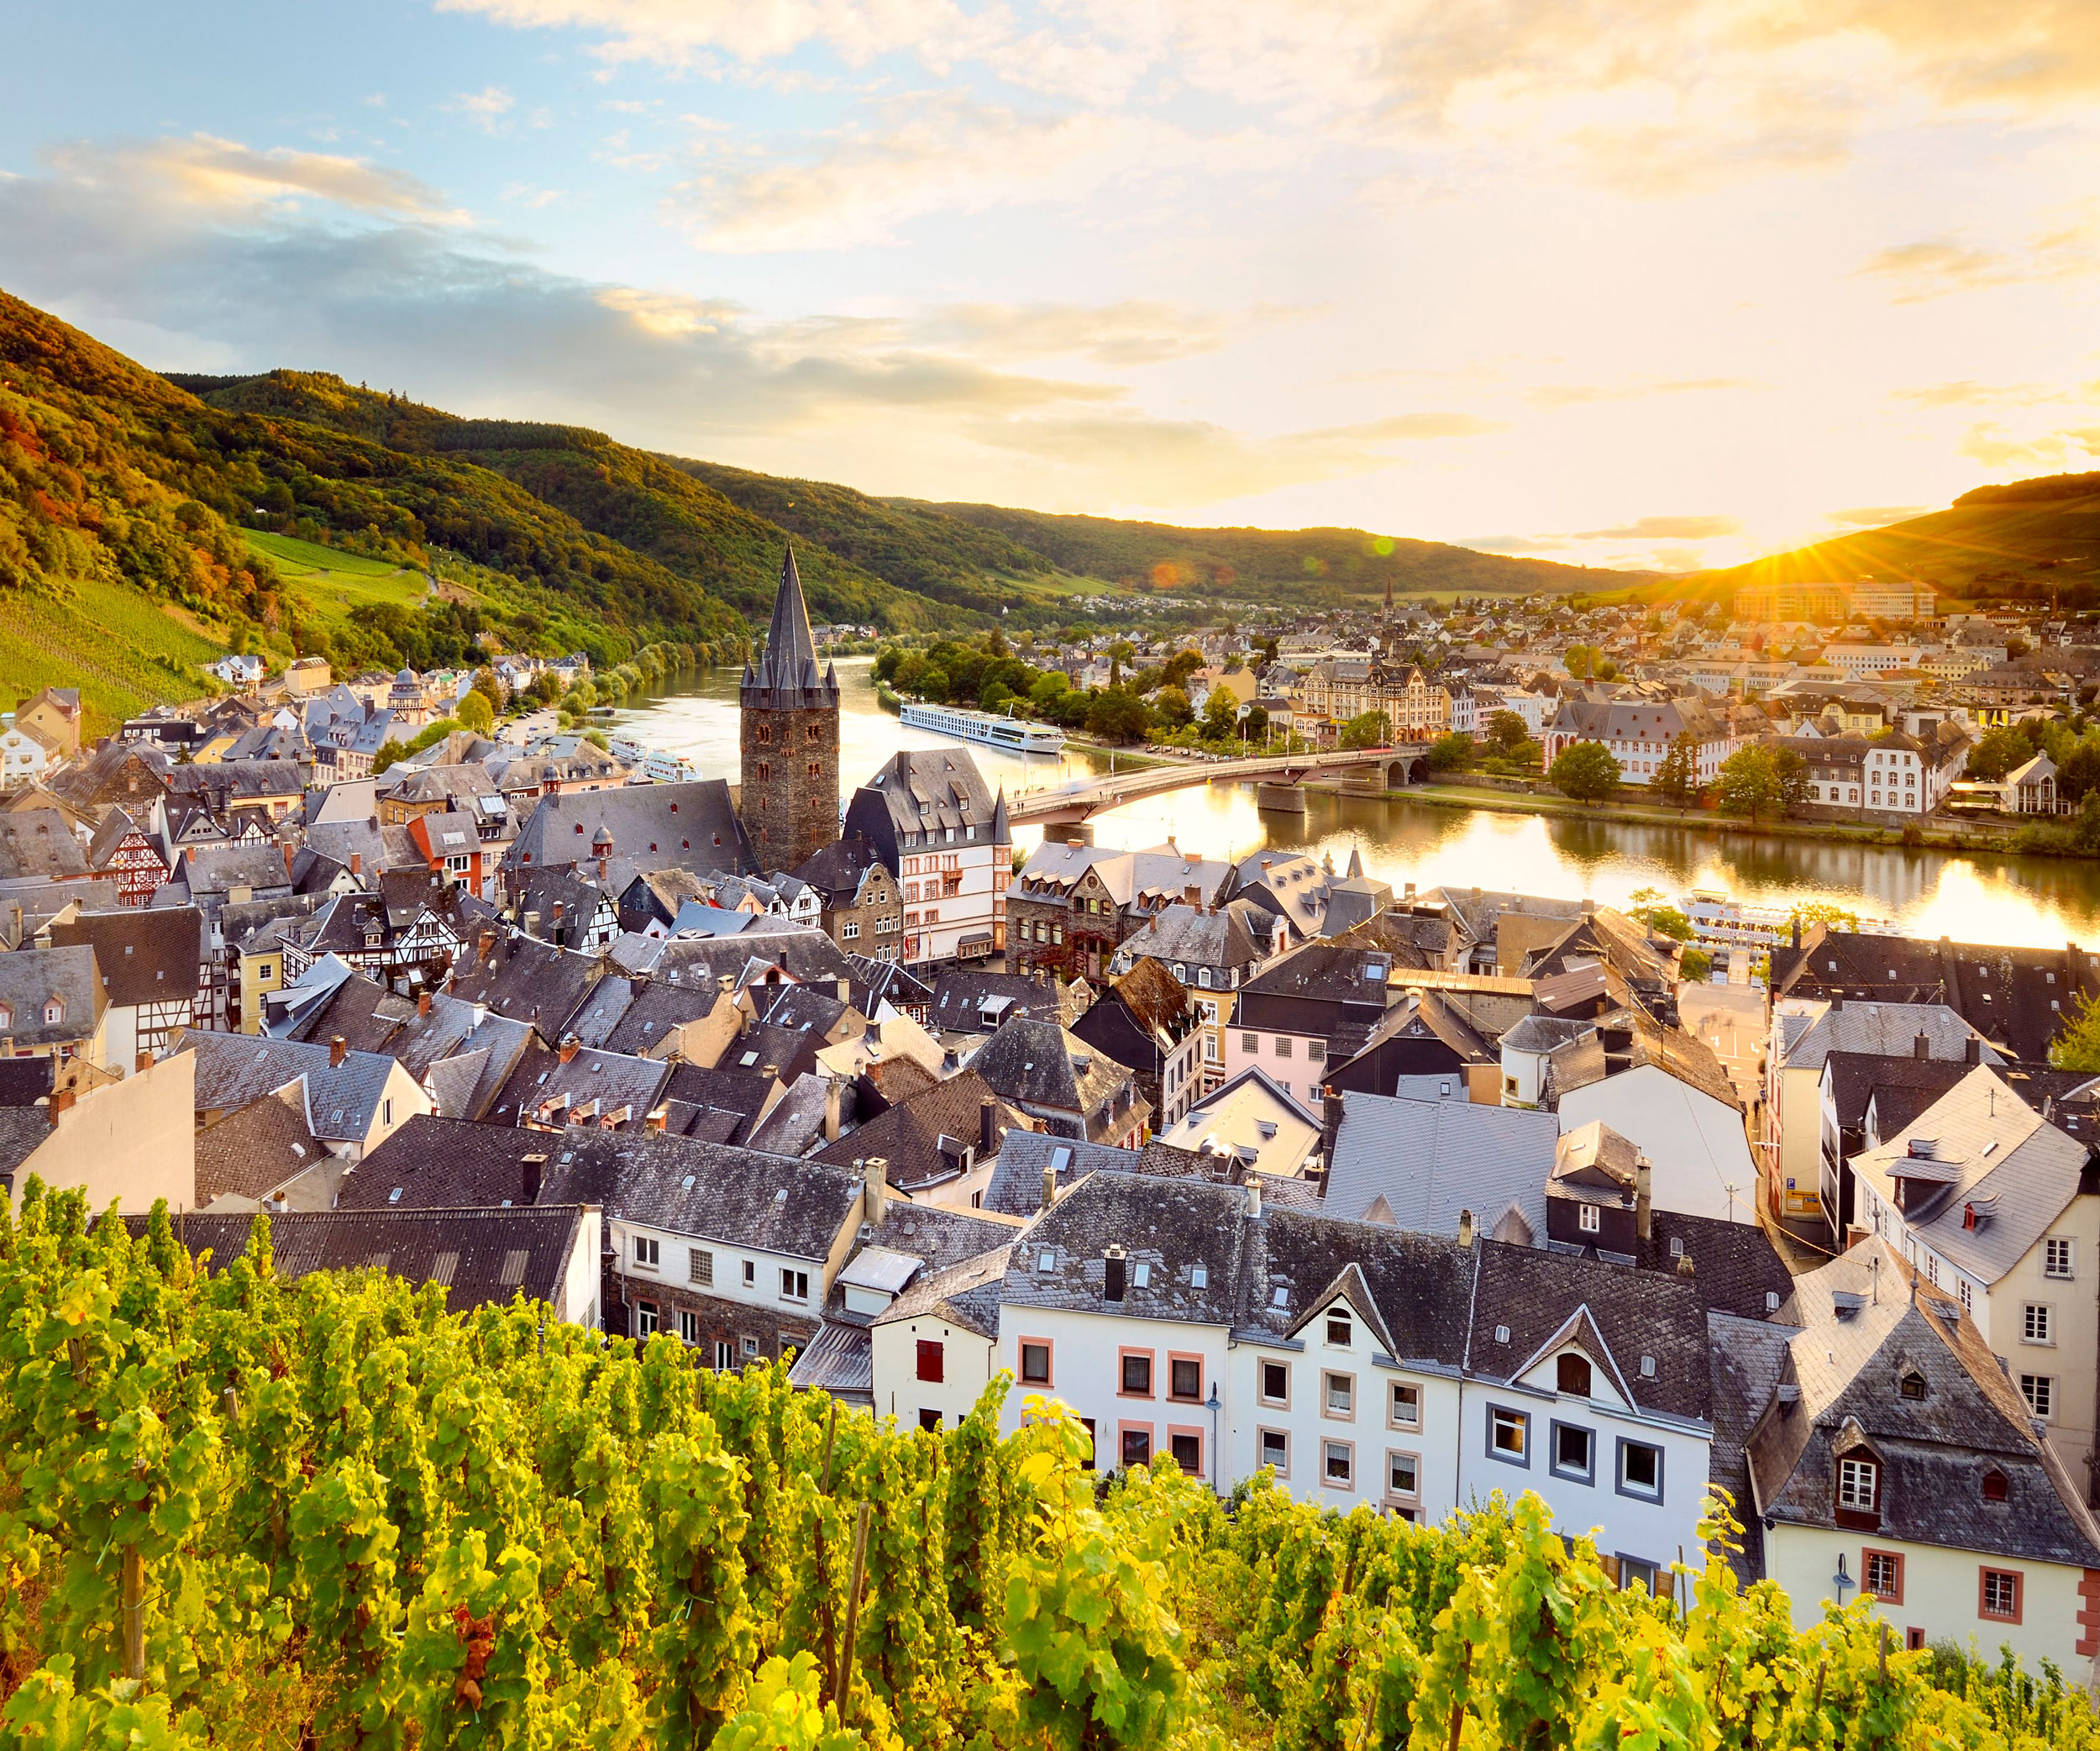 France, Luxembourg & Germany Bike & Boat: Mosel River Valley
